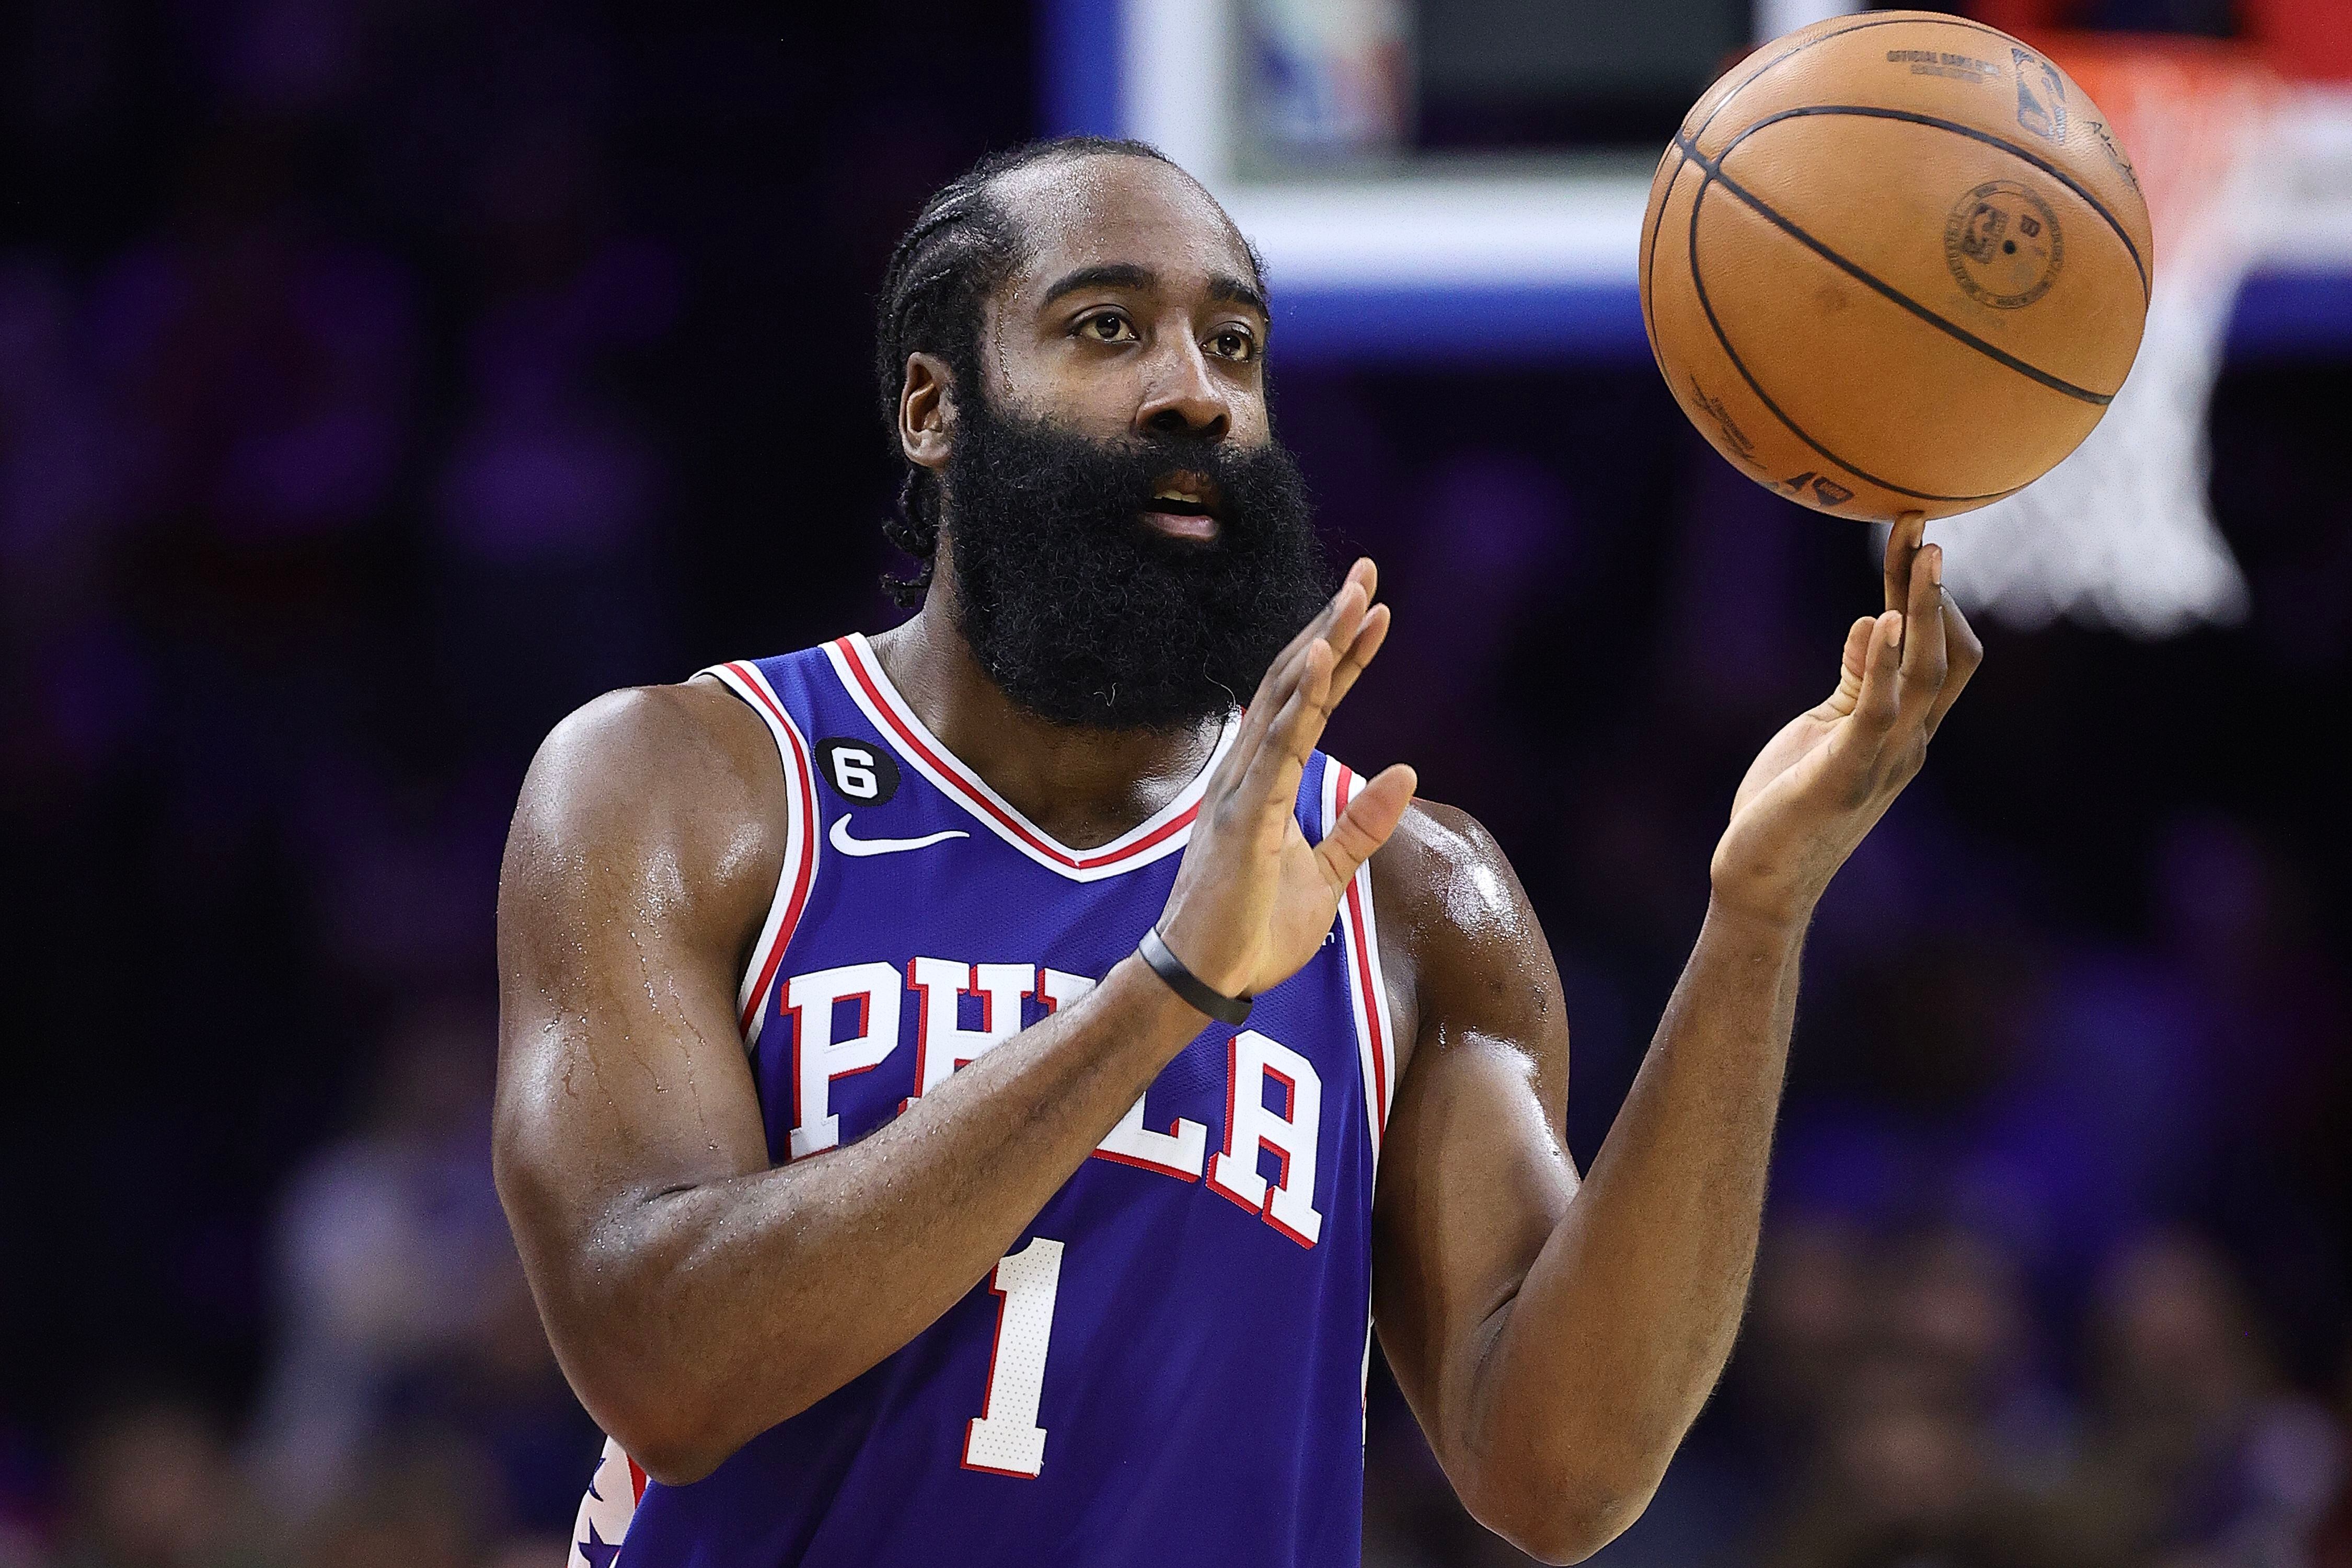 Lakers vs Clippers Prediction, Odds, Best Bets & Team Props - NBA